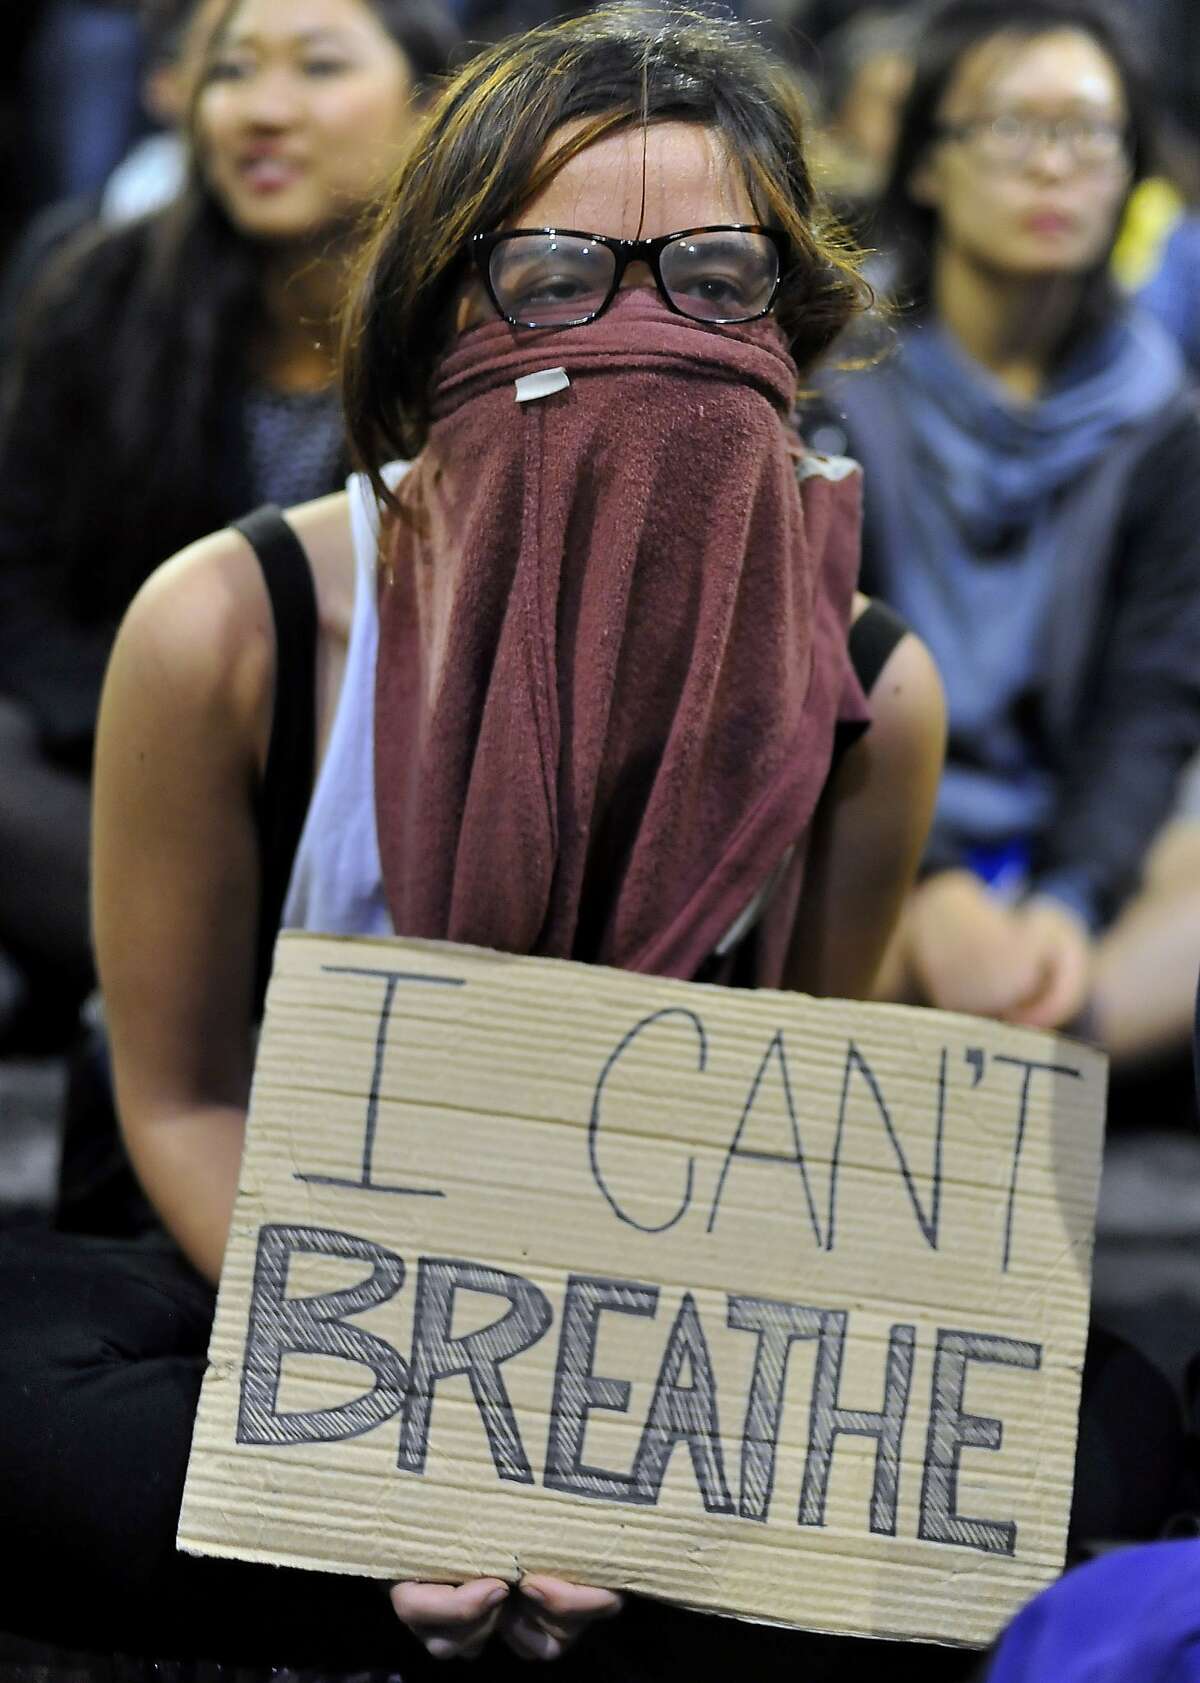 A girl who declined to give her name holds a sign in front of a police skirmish line during demonstrations in Berkeley, California on Saturday, December 6, 2014. Protesting continued through the night in response to the grand jury verdicts in the shooting death of Michael Brown in Ferguson, Missouri and the chokehold death of Eric Garner in New York City.